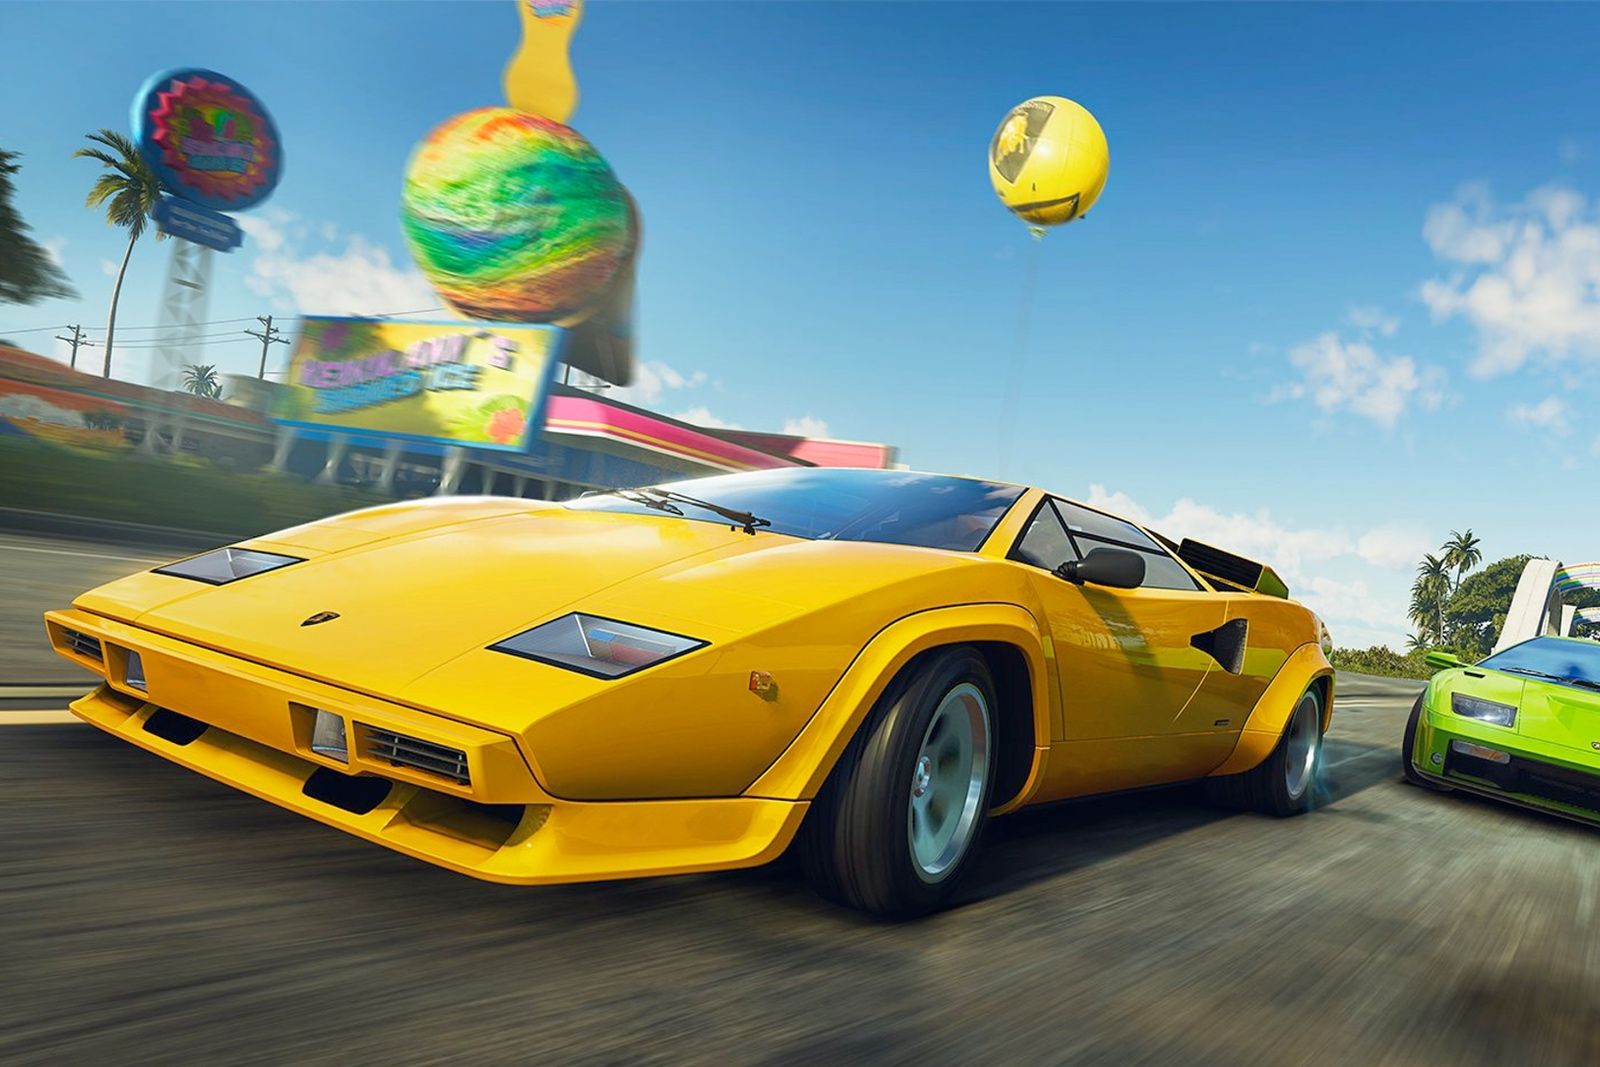 The Crew Motorfest Review – Imitation on the Horizon (PS5)